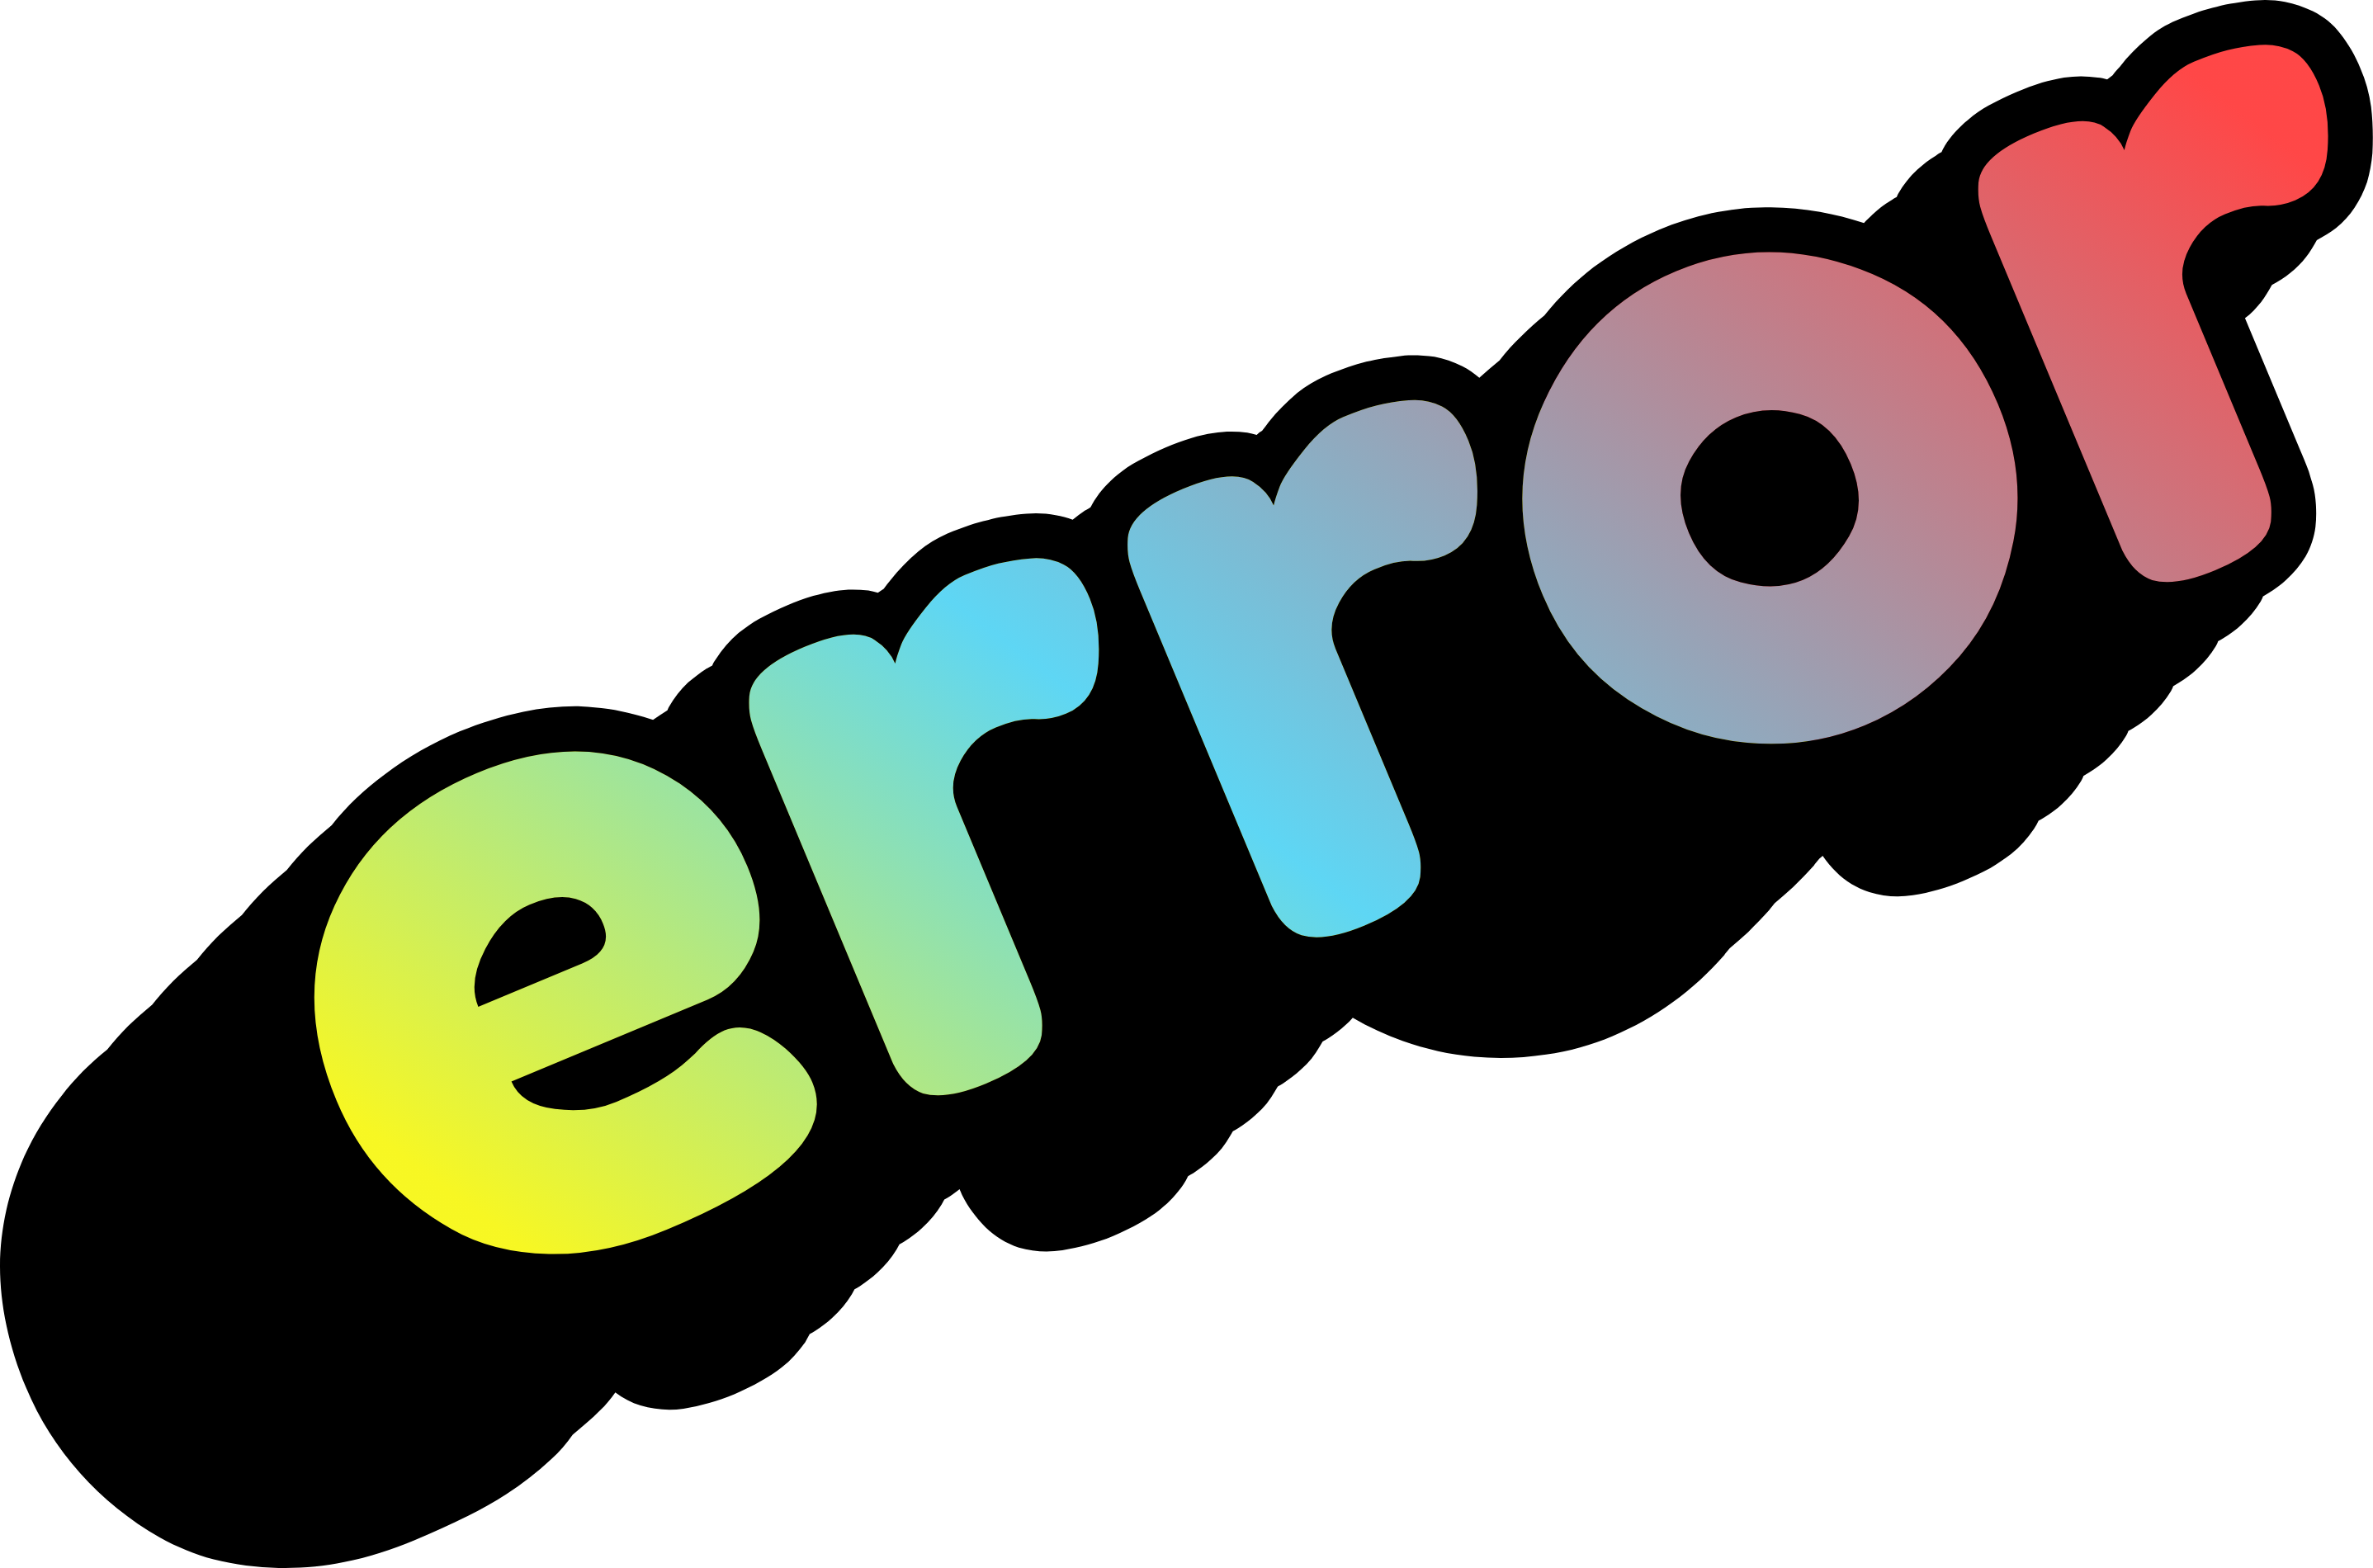 the word error with a rainbow gradient and black shadow 3D pop-out effect